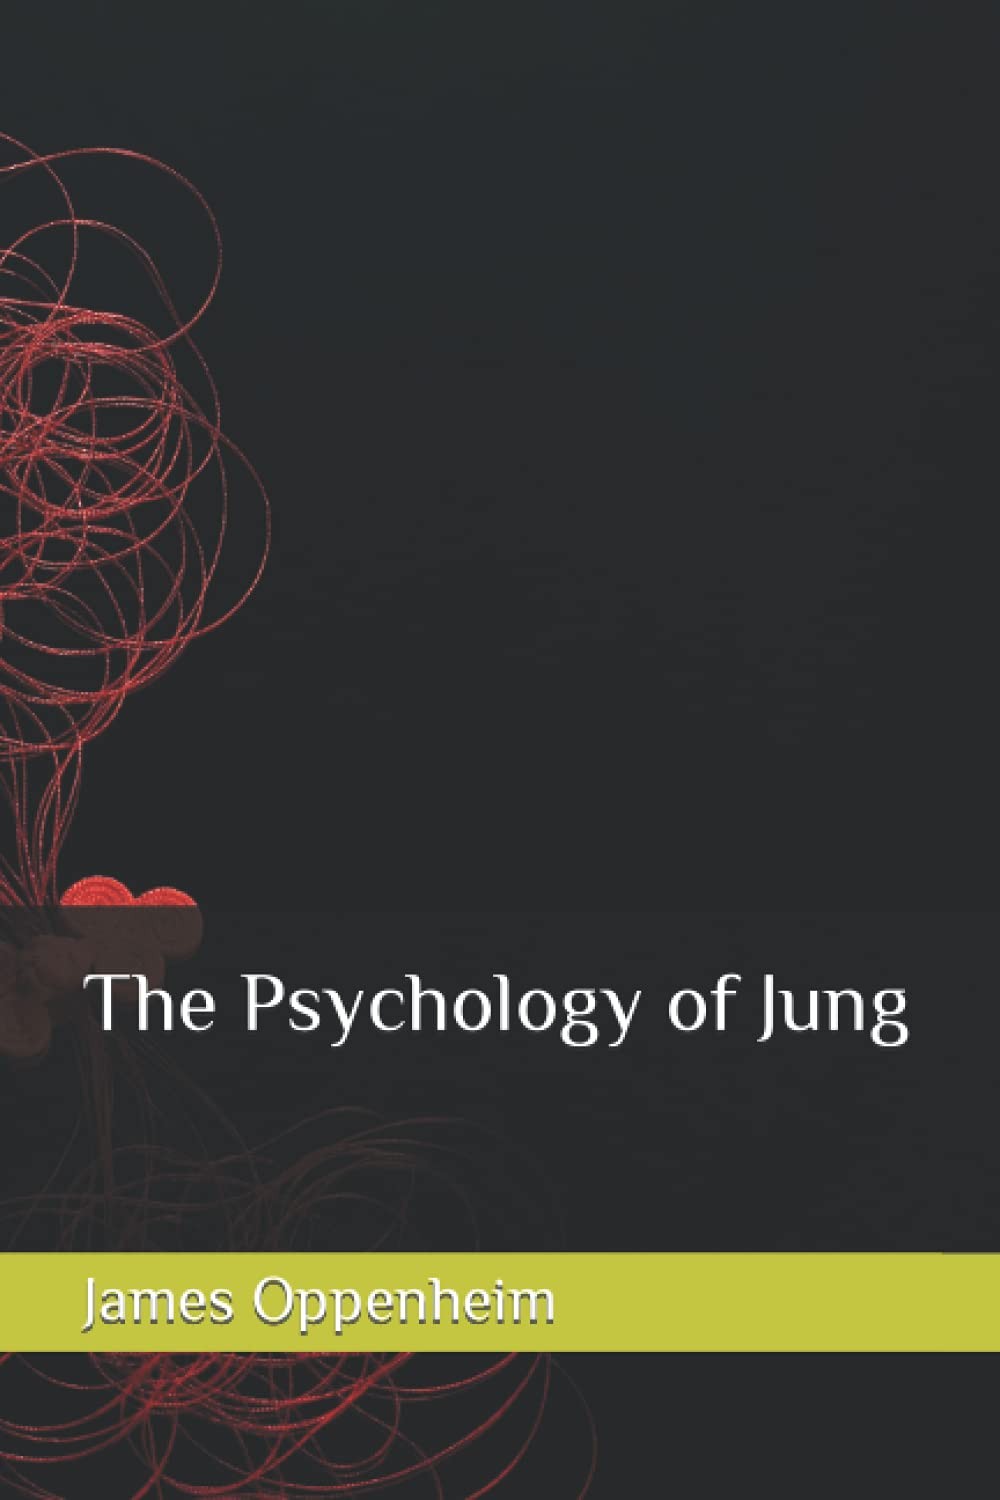 The Psychology of Jung